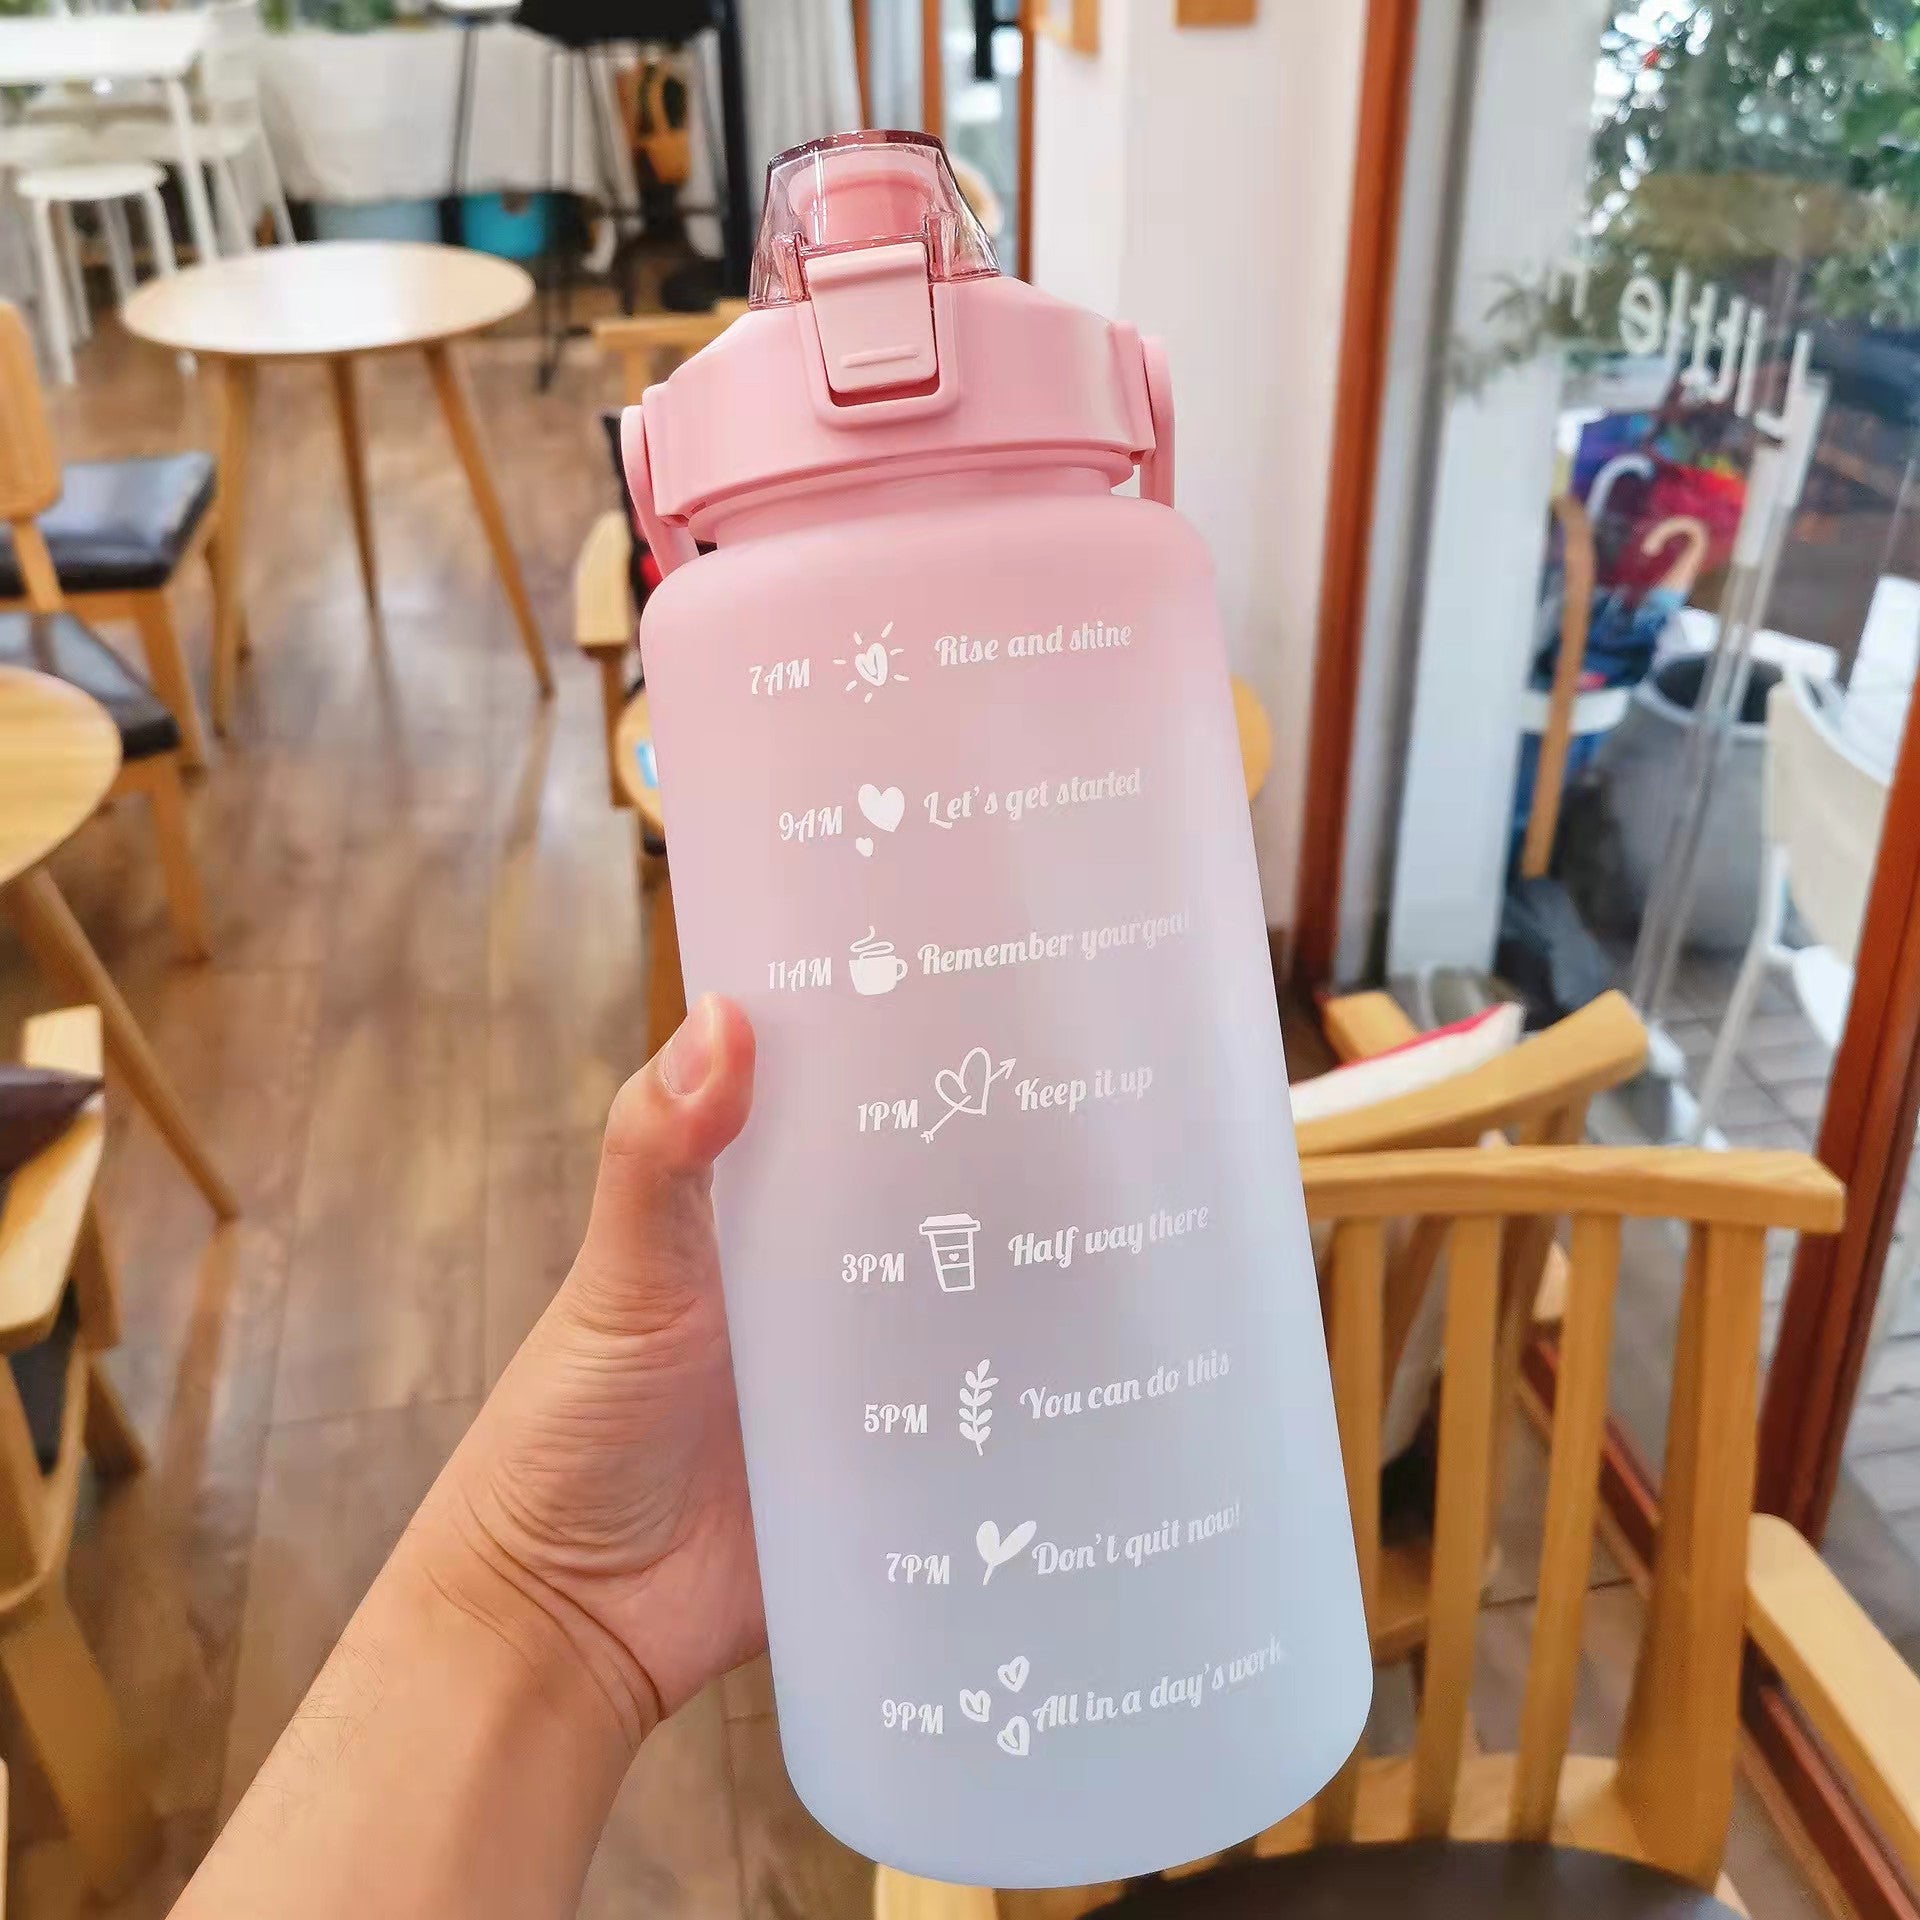 50% OFF 【XLY】Large capacity color gradient water bottle